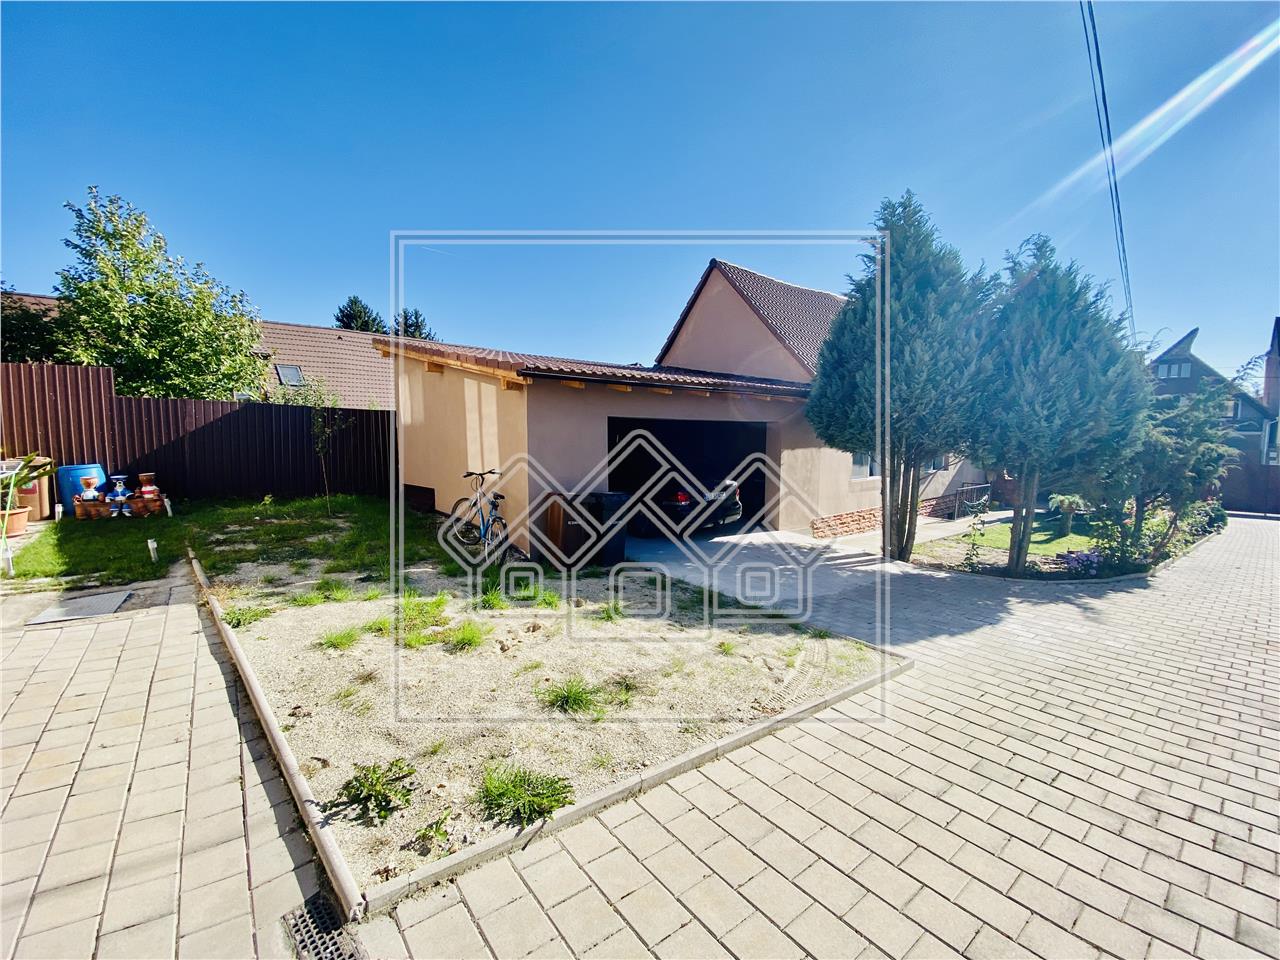 House for sale in Sibiu - duplex type - furnished and equipped - Turni